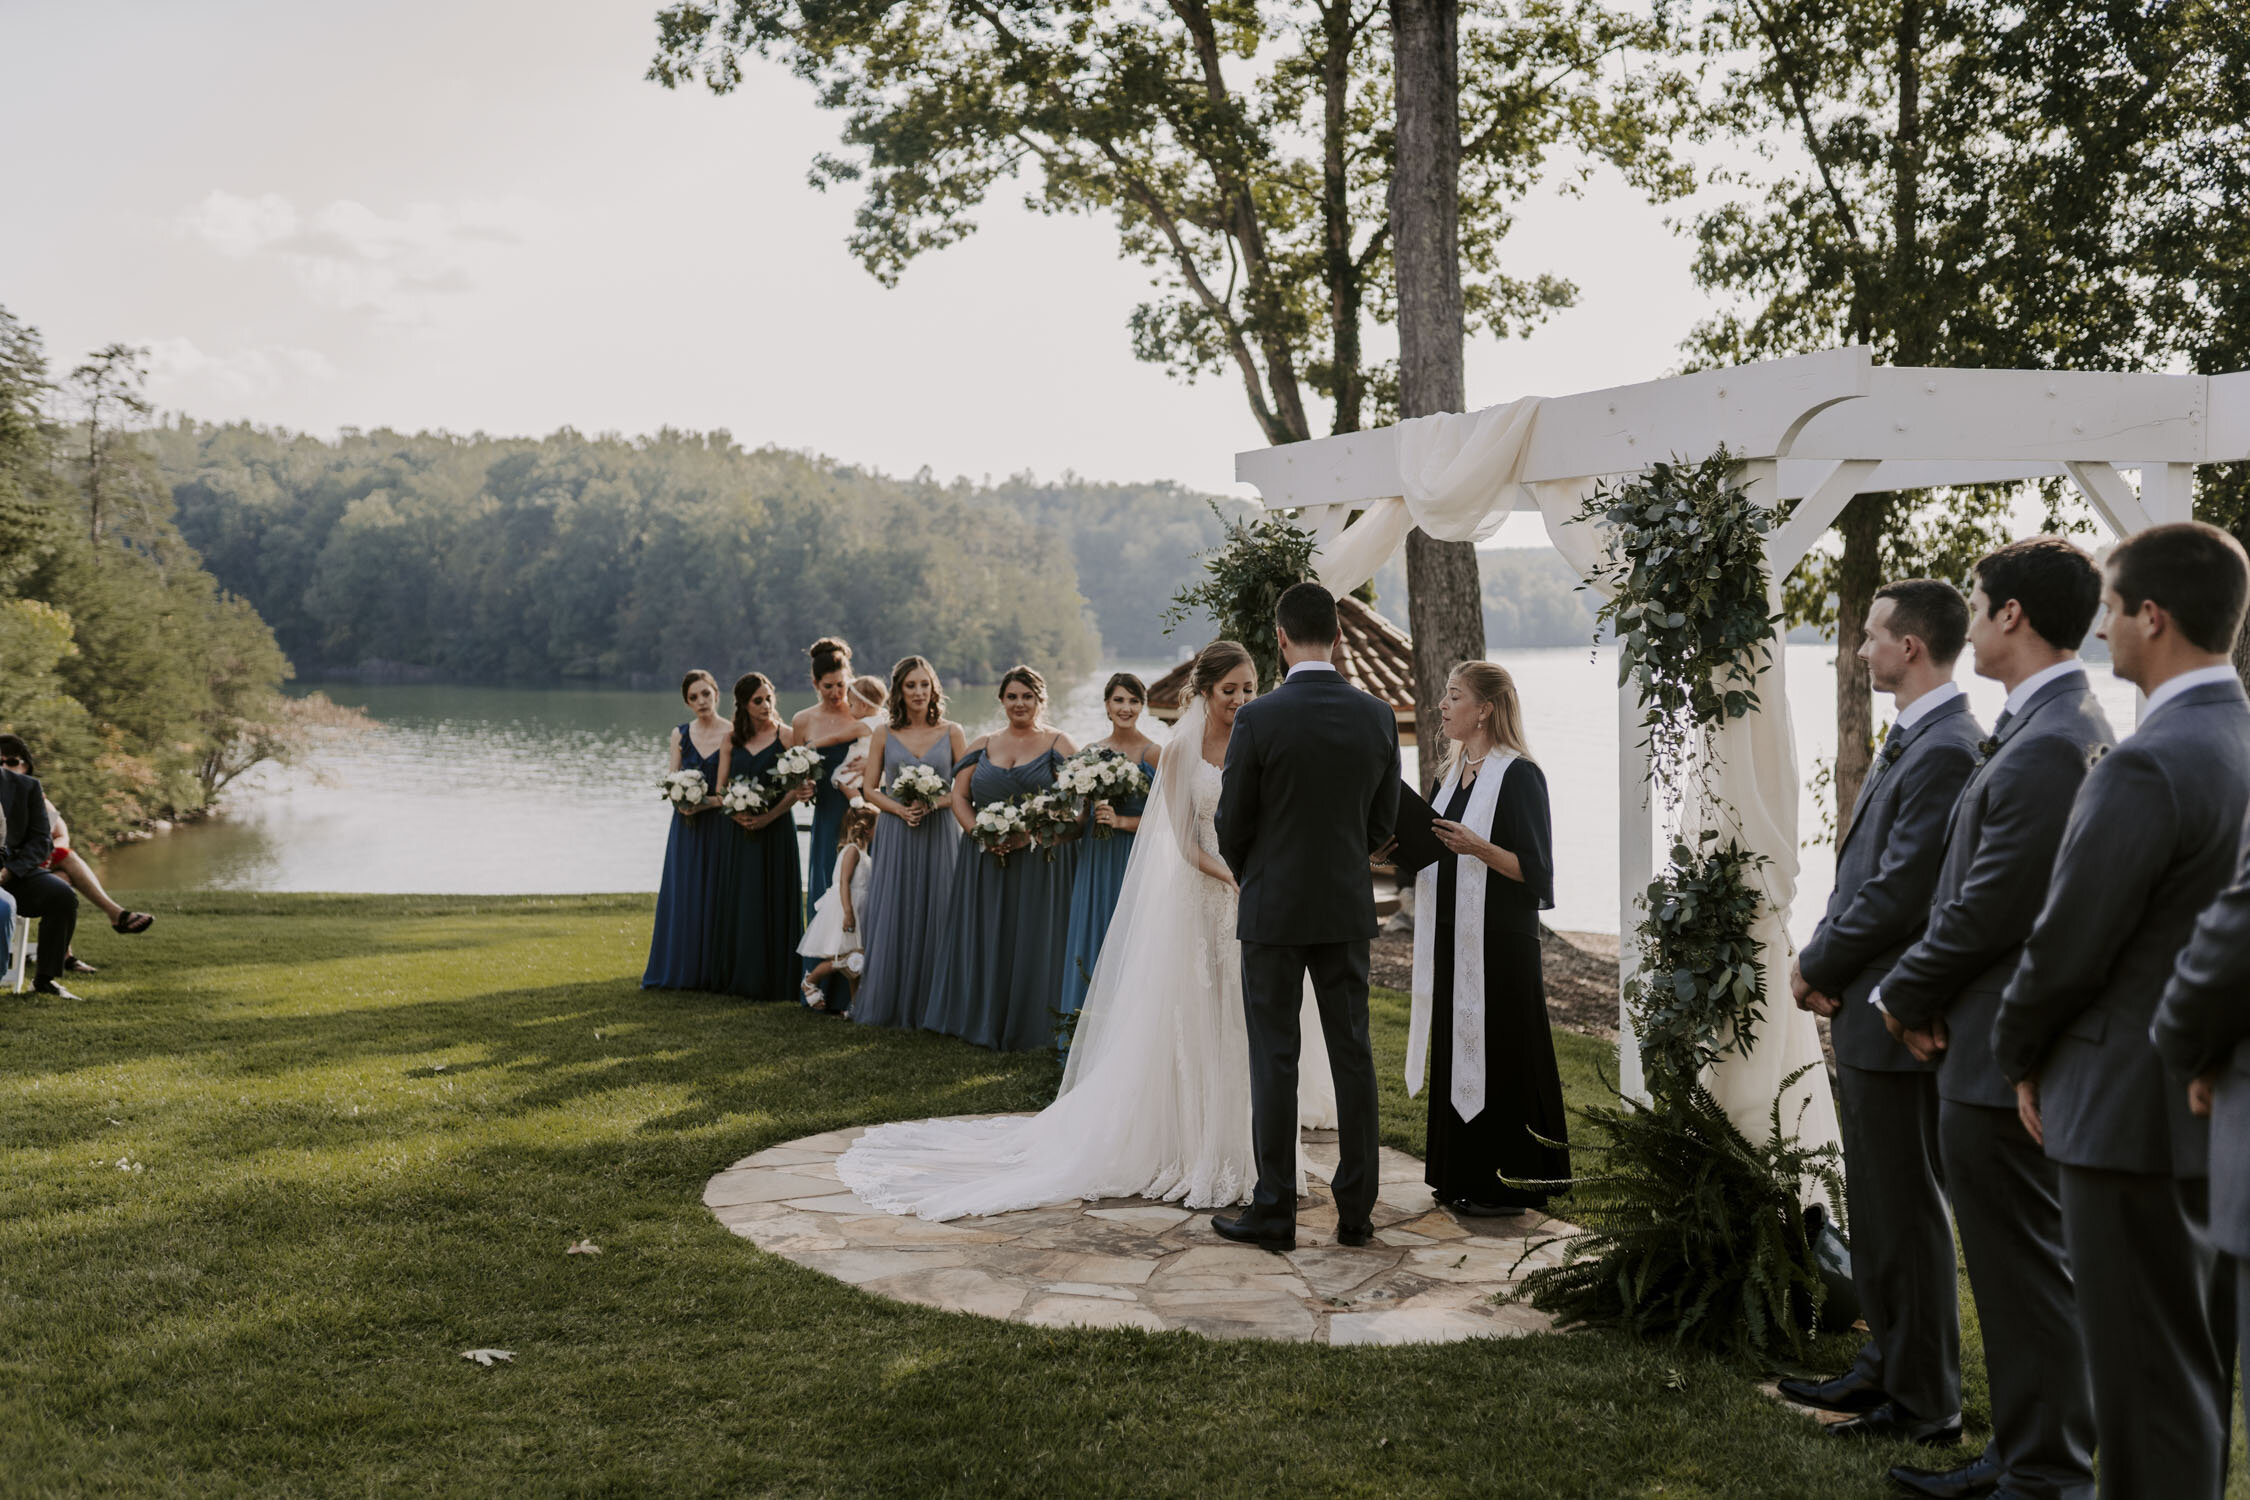 What To Look For In Your Wedding Venue To Get The Most Out Of Your Photos